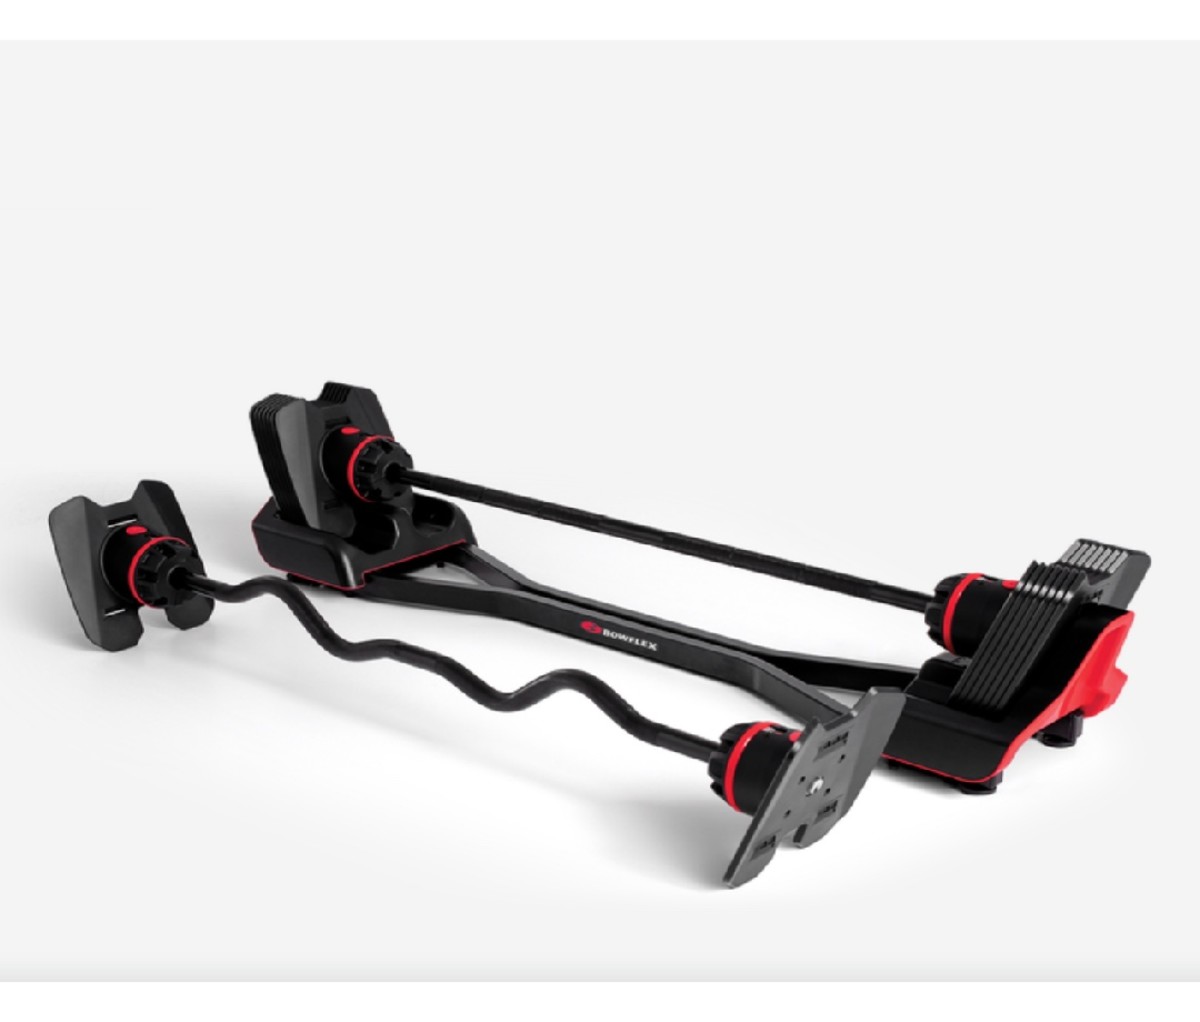 The Bowflex barbell is great choice for building up your home gym.